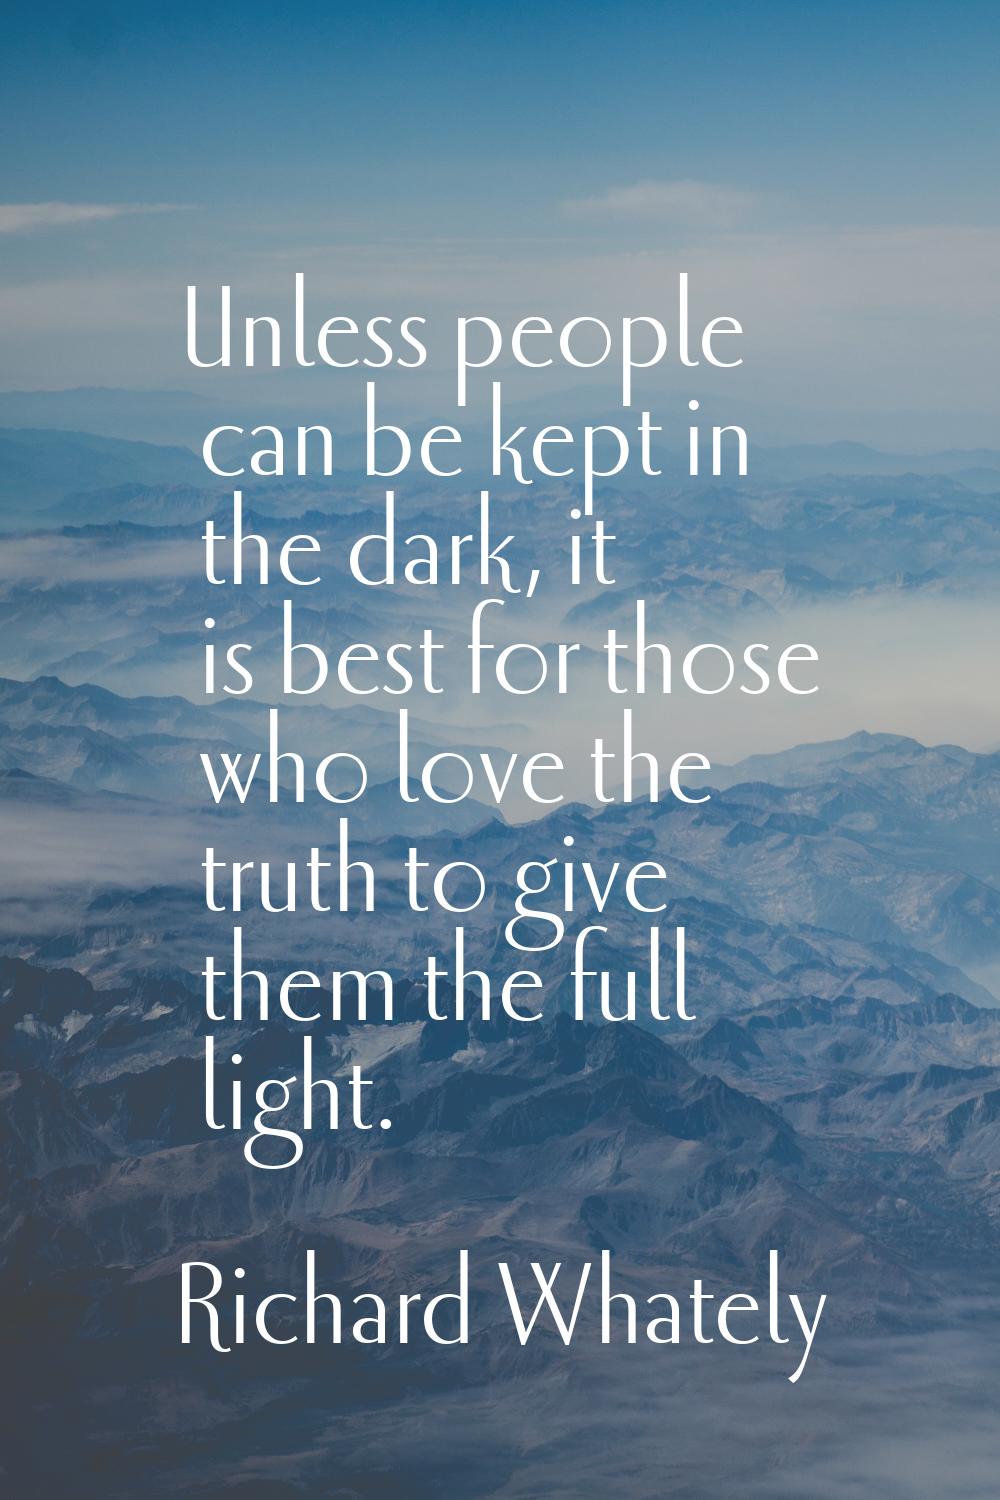 Unless people can be kept in the dark, it is best for those who love the truth to give them the ful